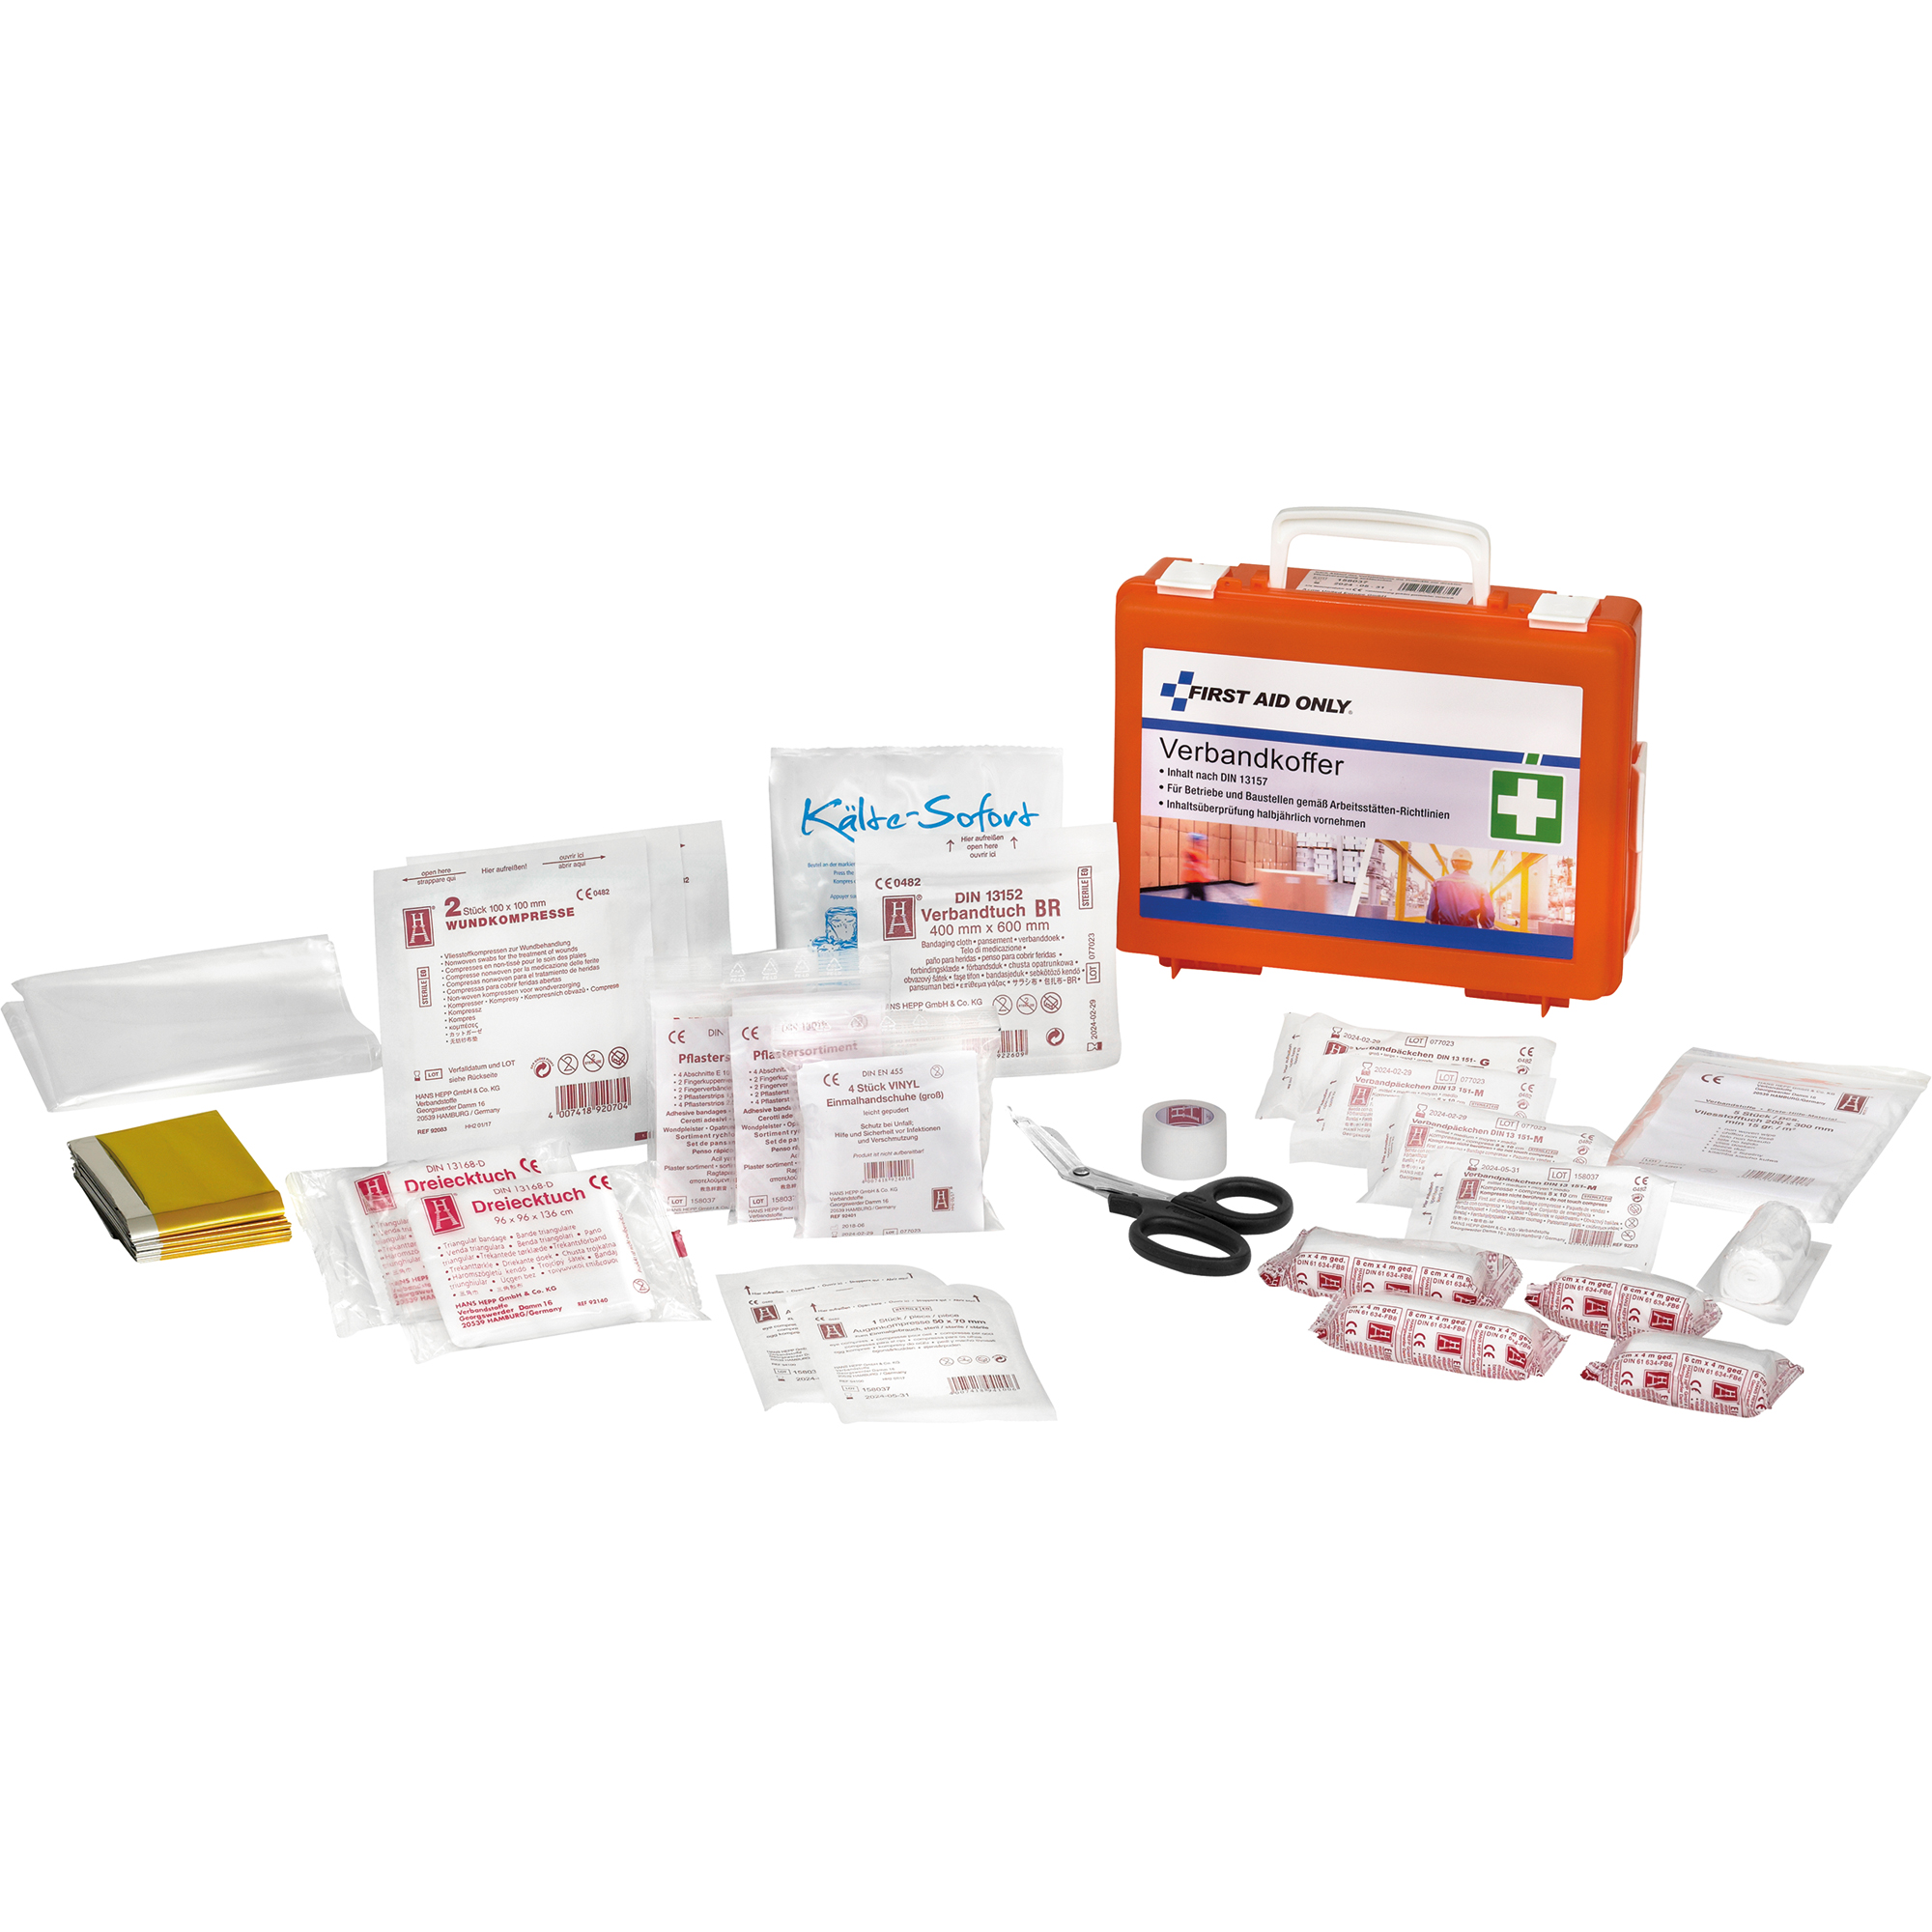 FIRST AID ONLY Verbandskoffer P-10020 DIN 13157